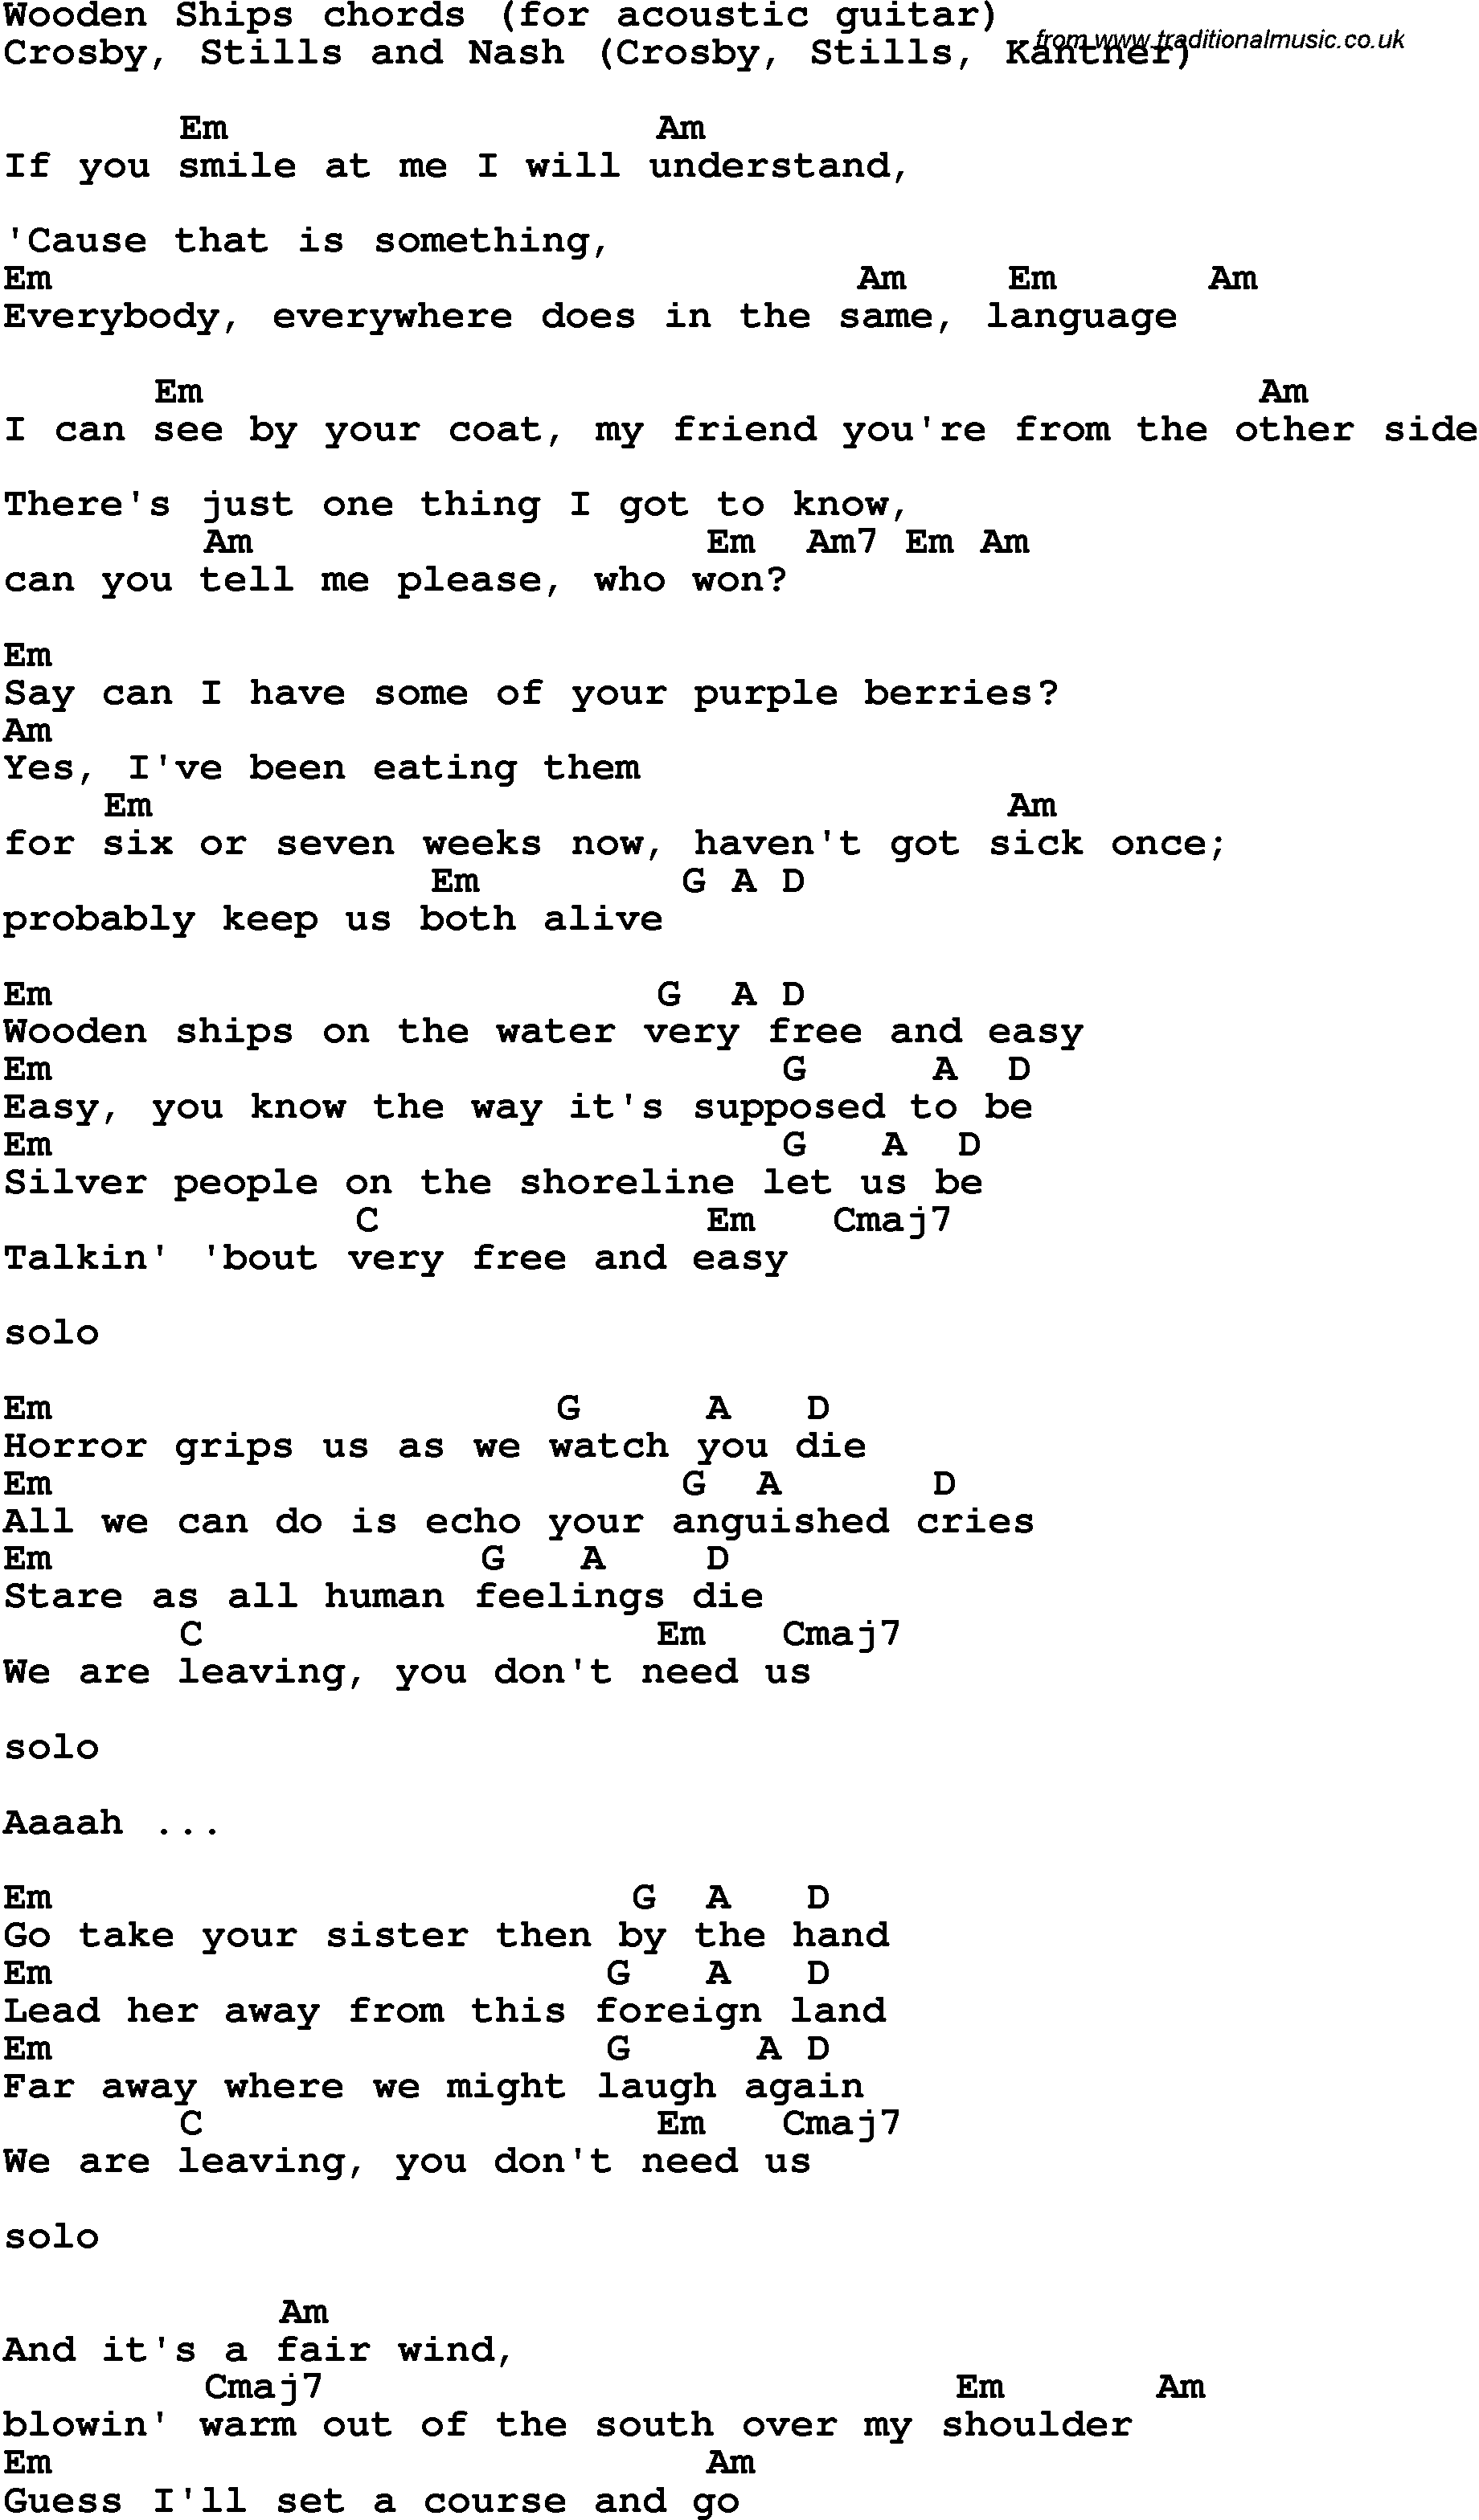 Song Lyrics with guitar chords for Wooden Ships